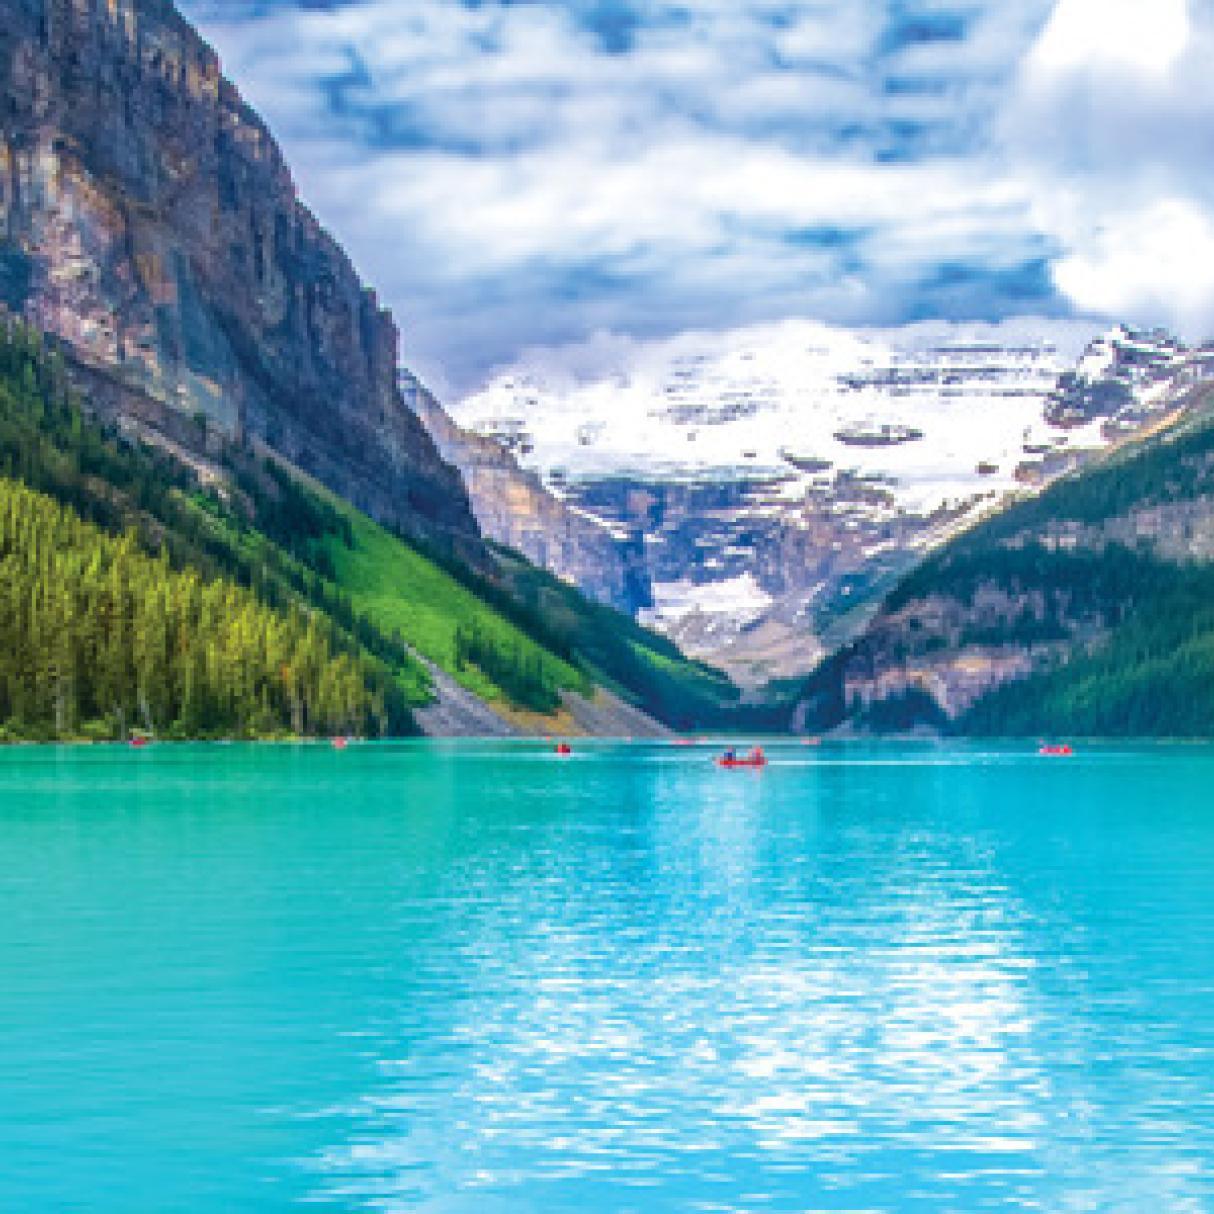 Mountains and green forest surround a turquoise blue lake 